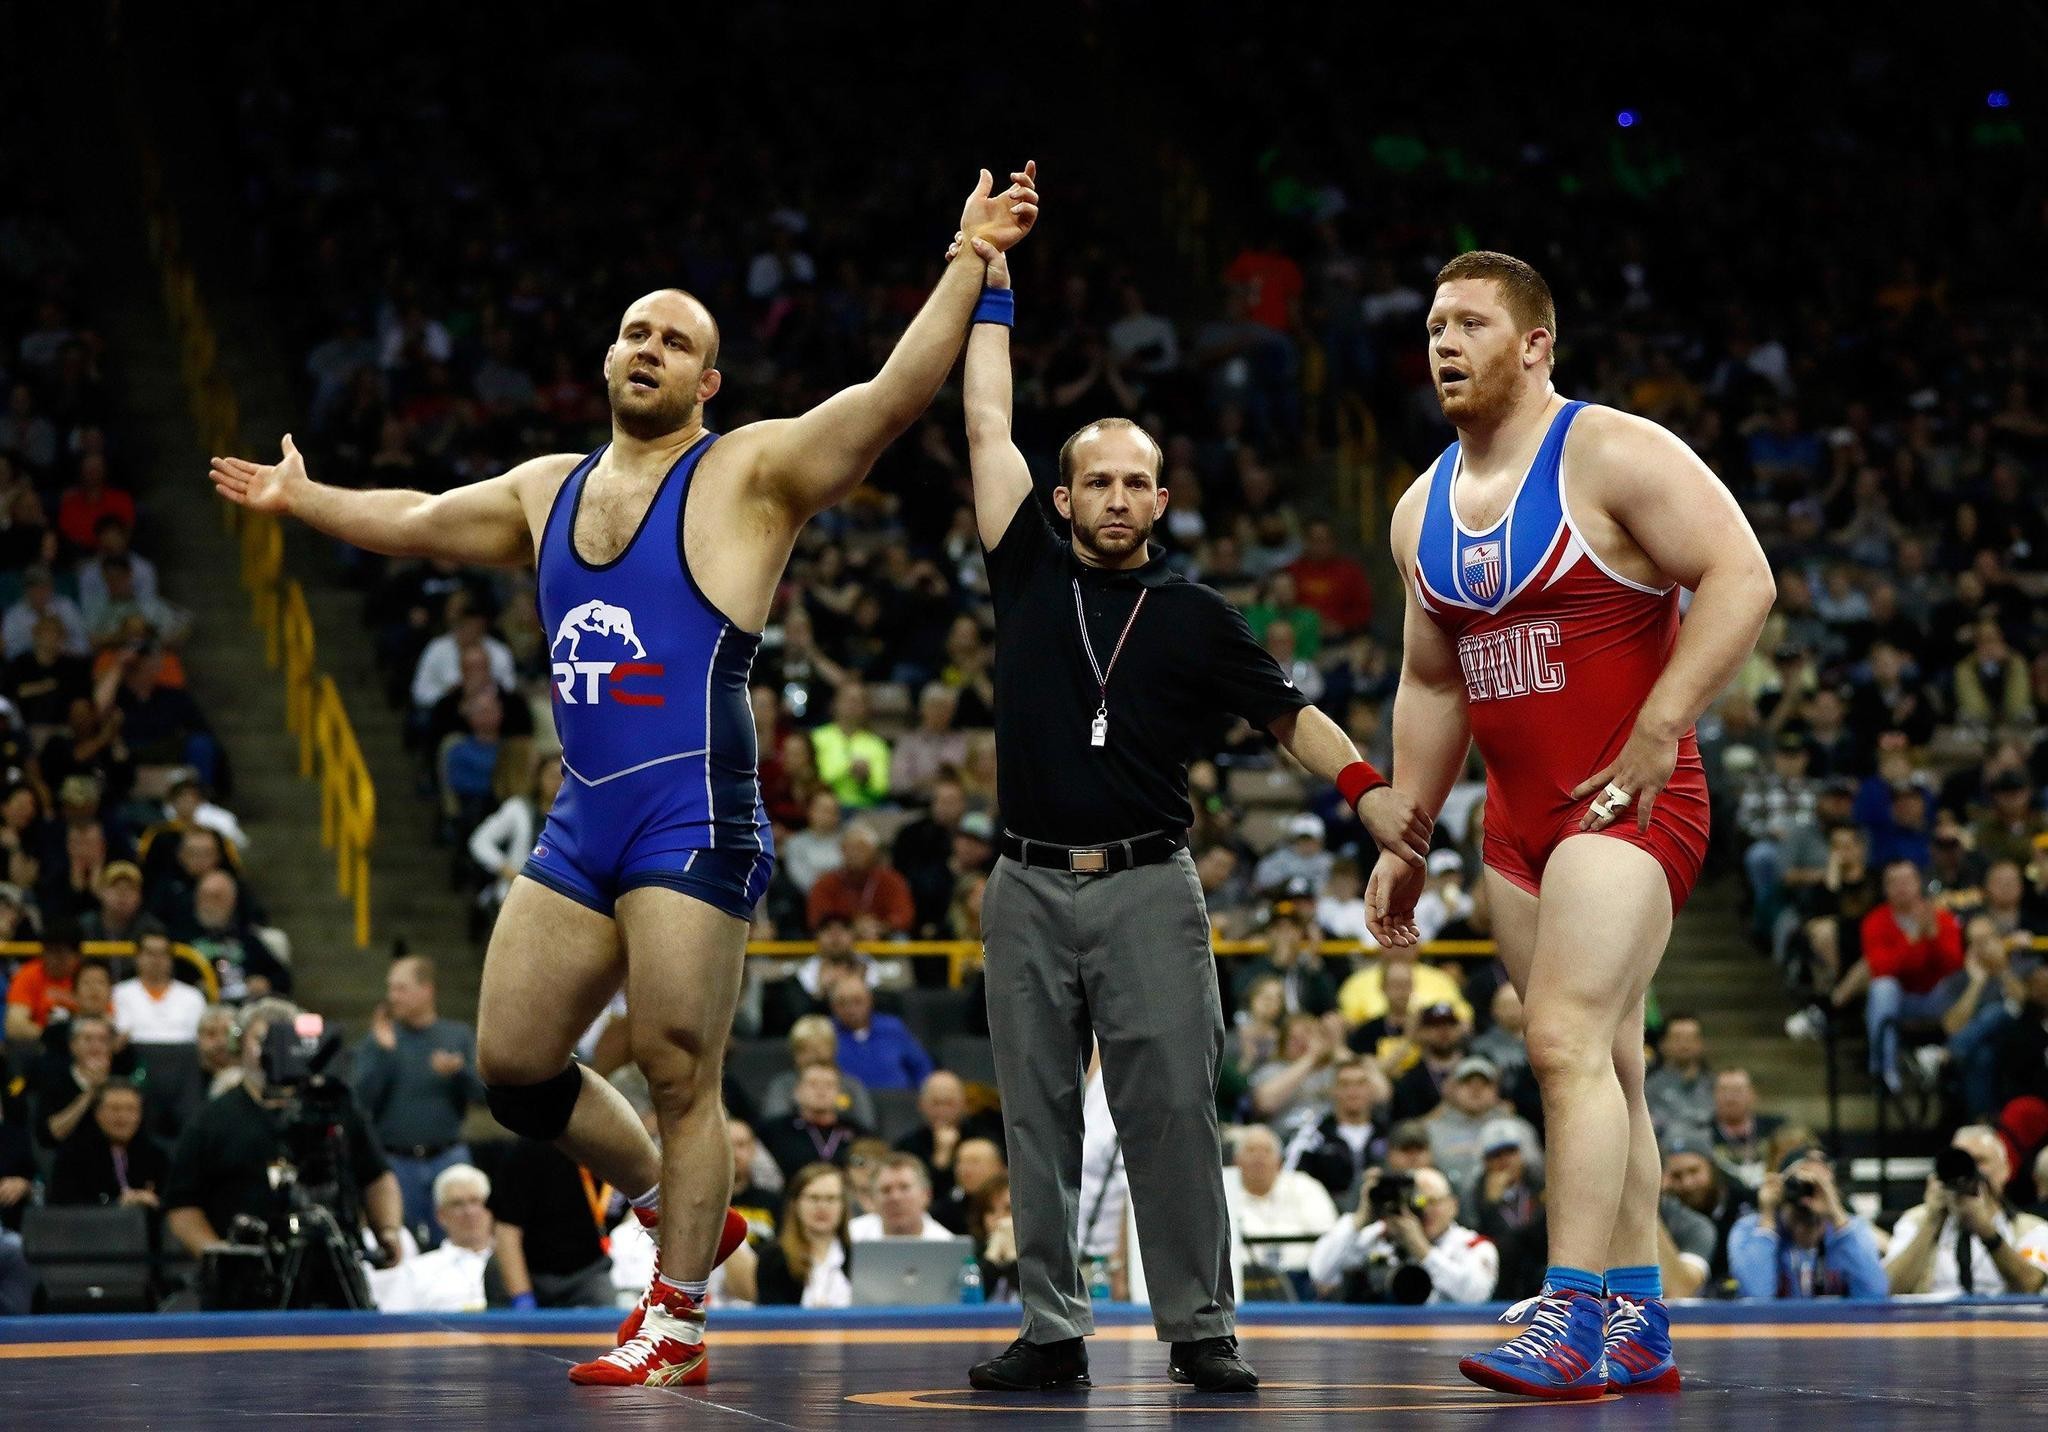 2048x1432 Iranian ban on US wrestlers affects former Lehigh national champion - The  Morning Call